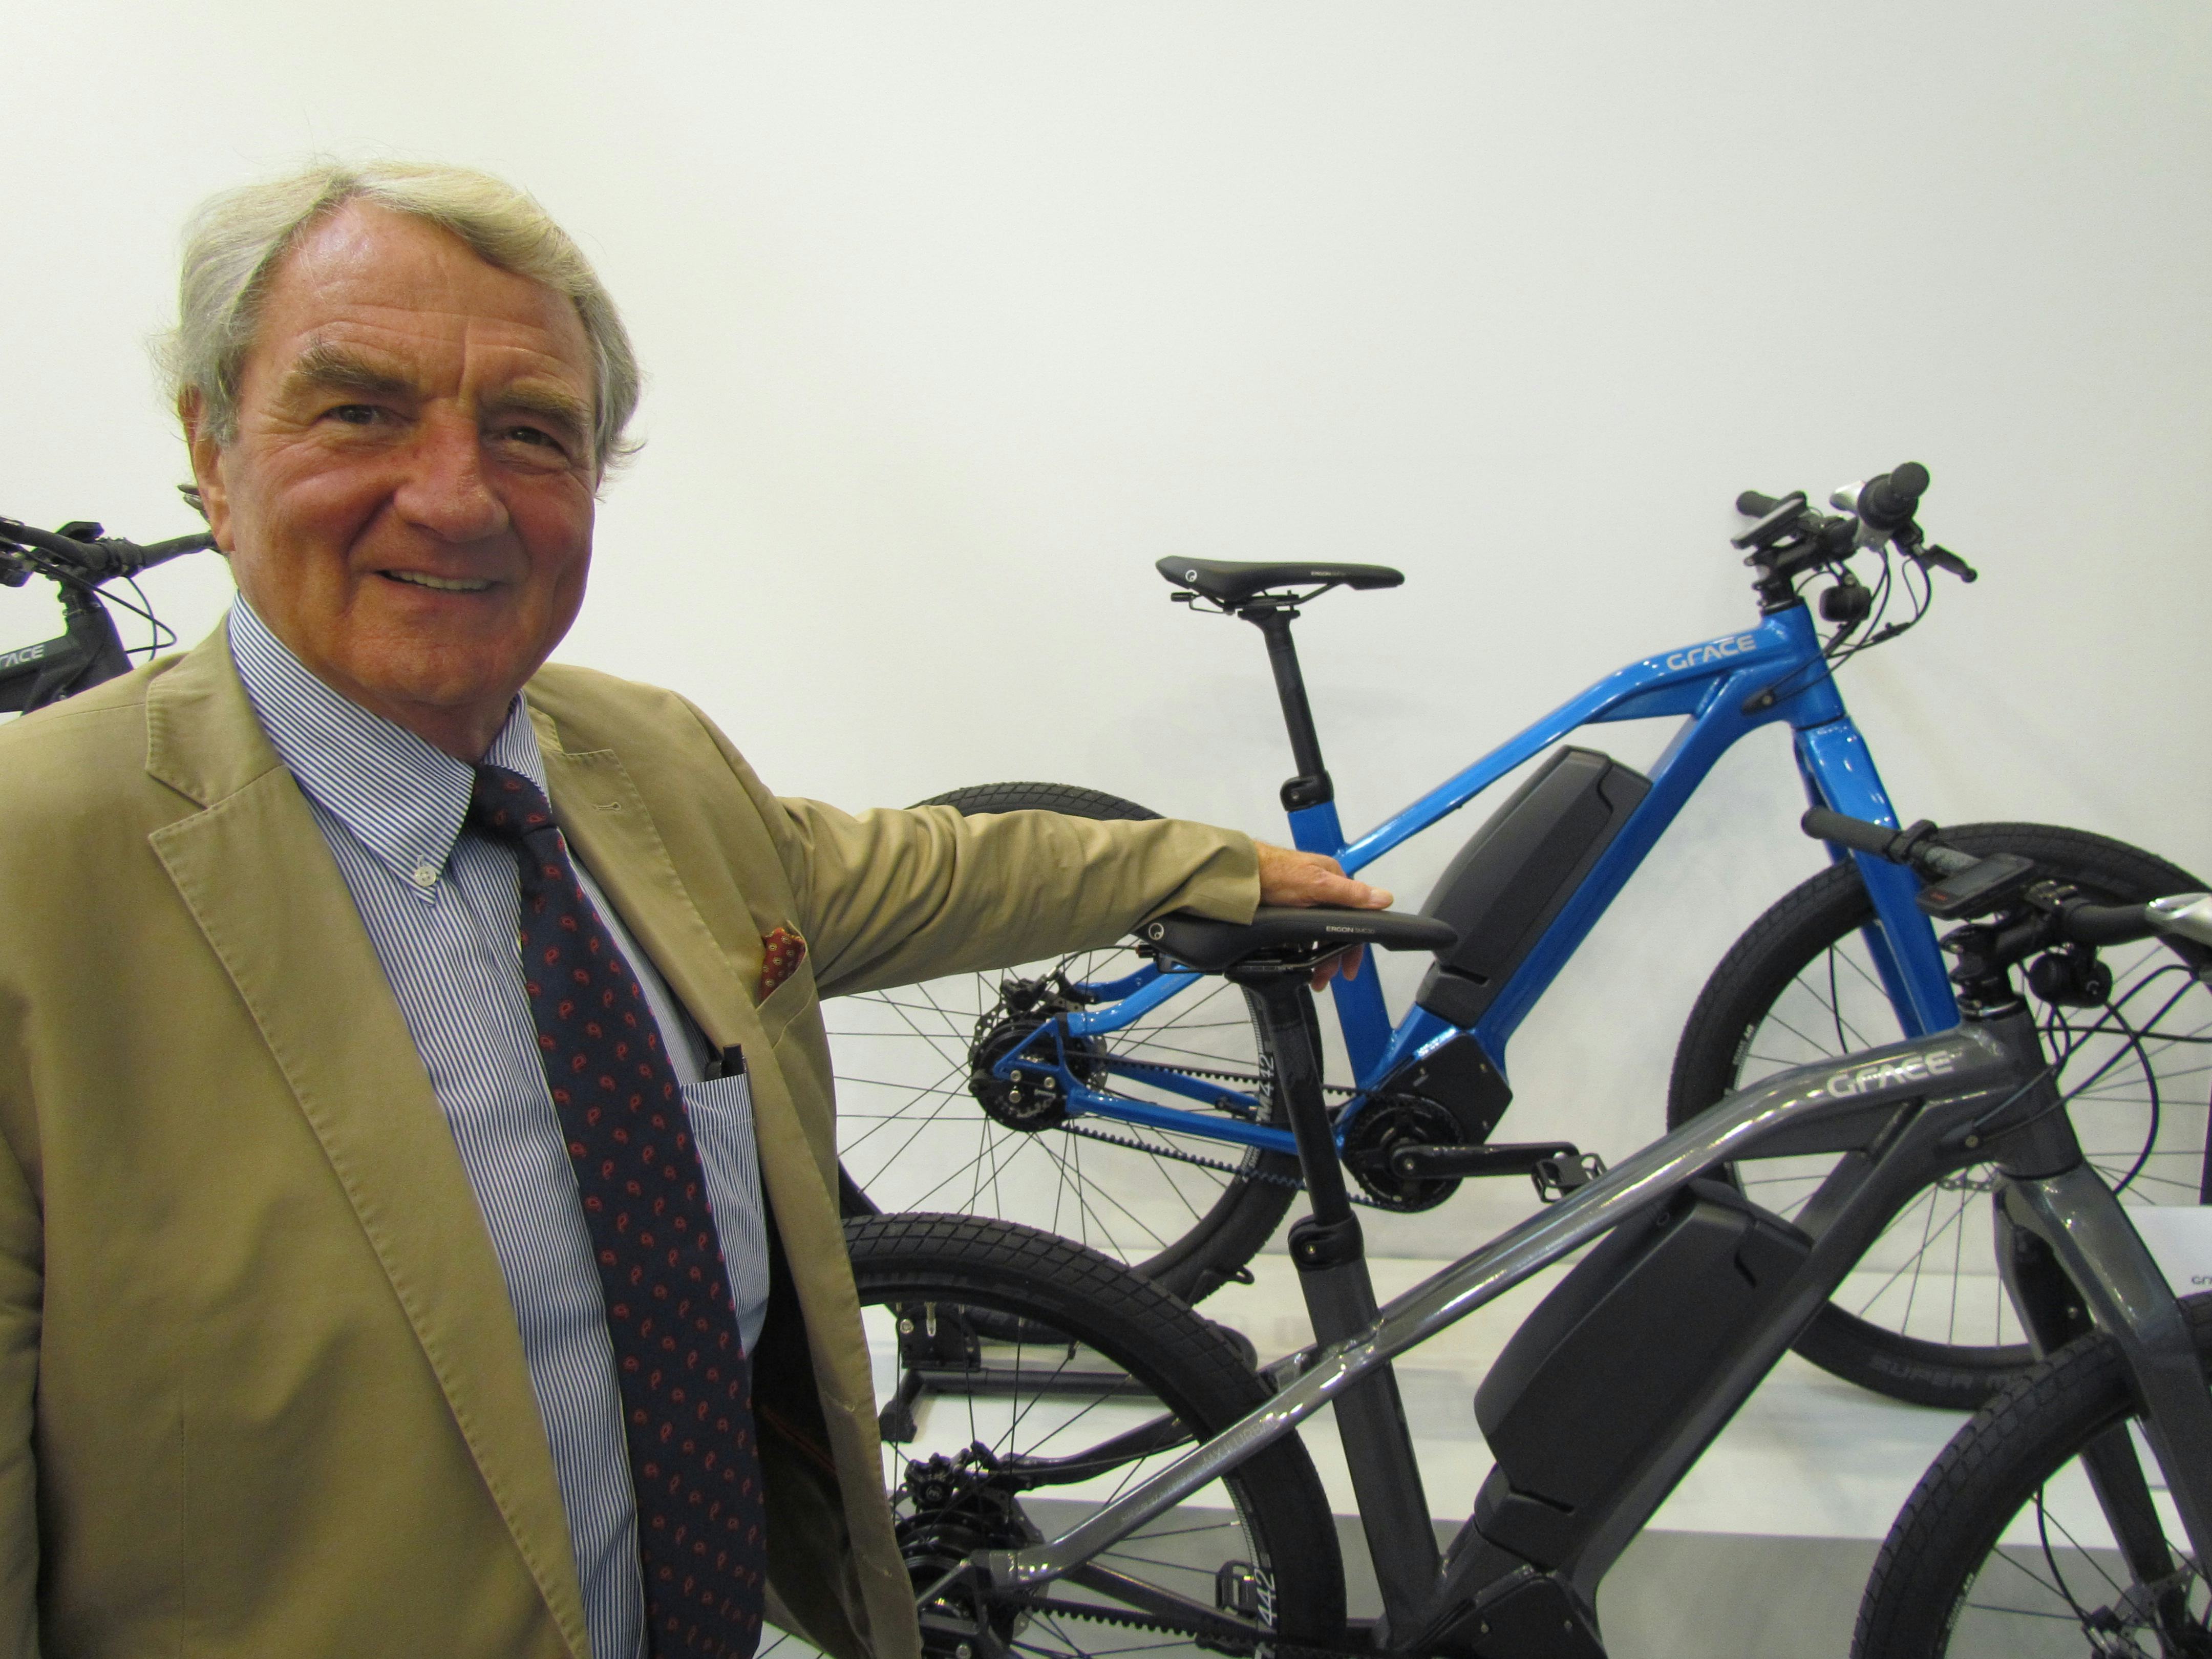 MIFA owner and CEO Heinrich von Nathusius, ‘We will not take-over the complete Cycleurope bicycle production in France.’ – Photo Bike Europe